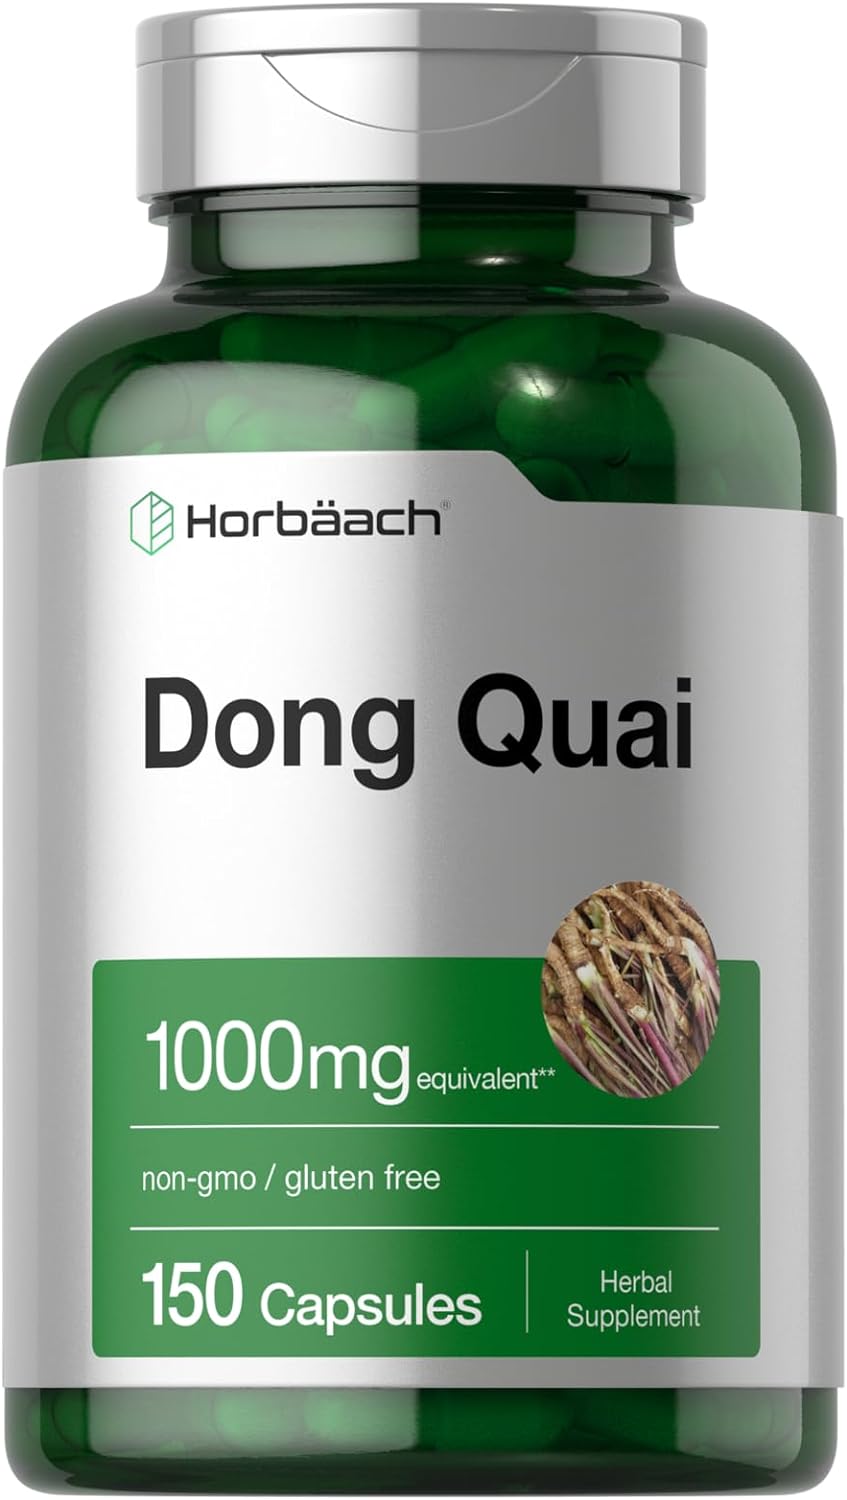 Horbaach Dong Quai Capsules | 1000mg | 150 Count | Non-GMO and Gluten Free Supplement | Traditional Herb